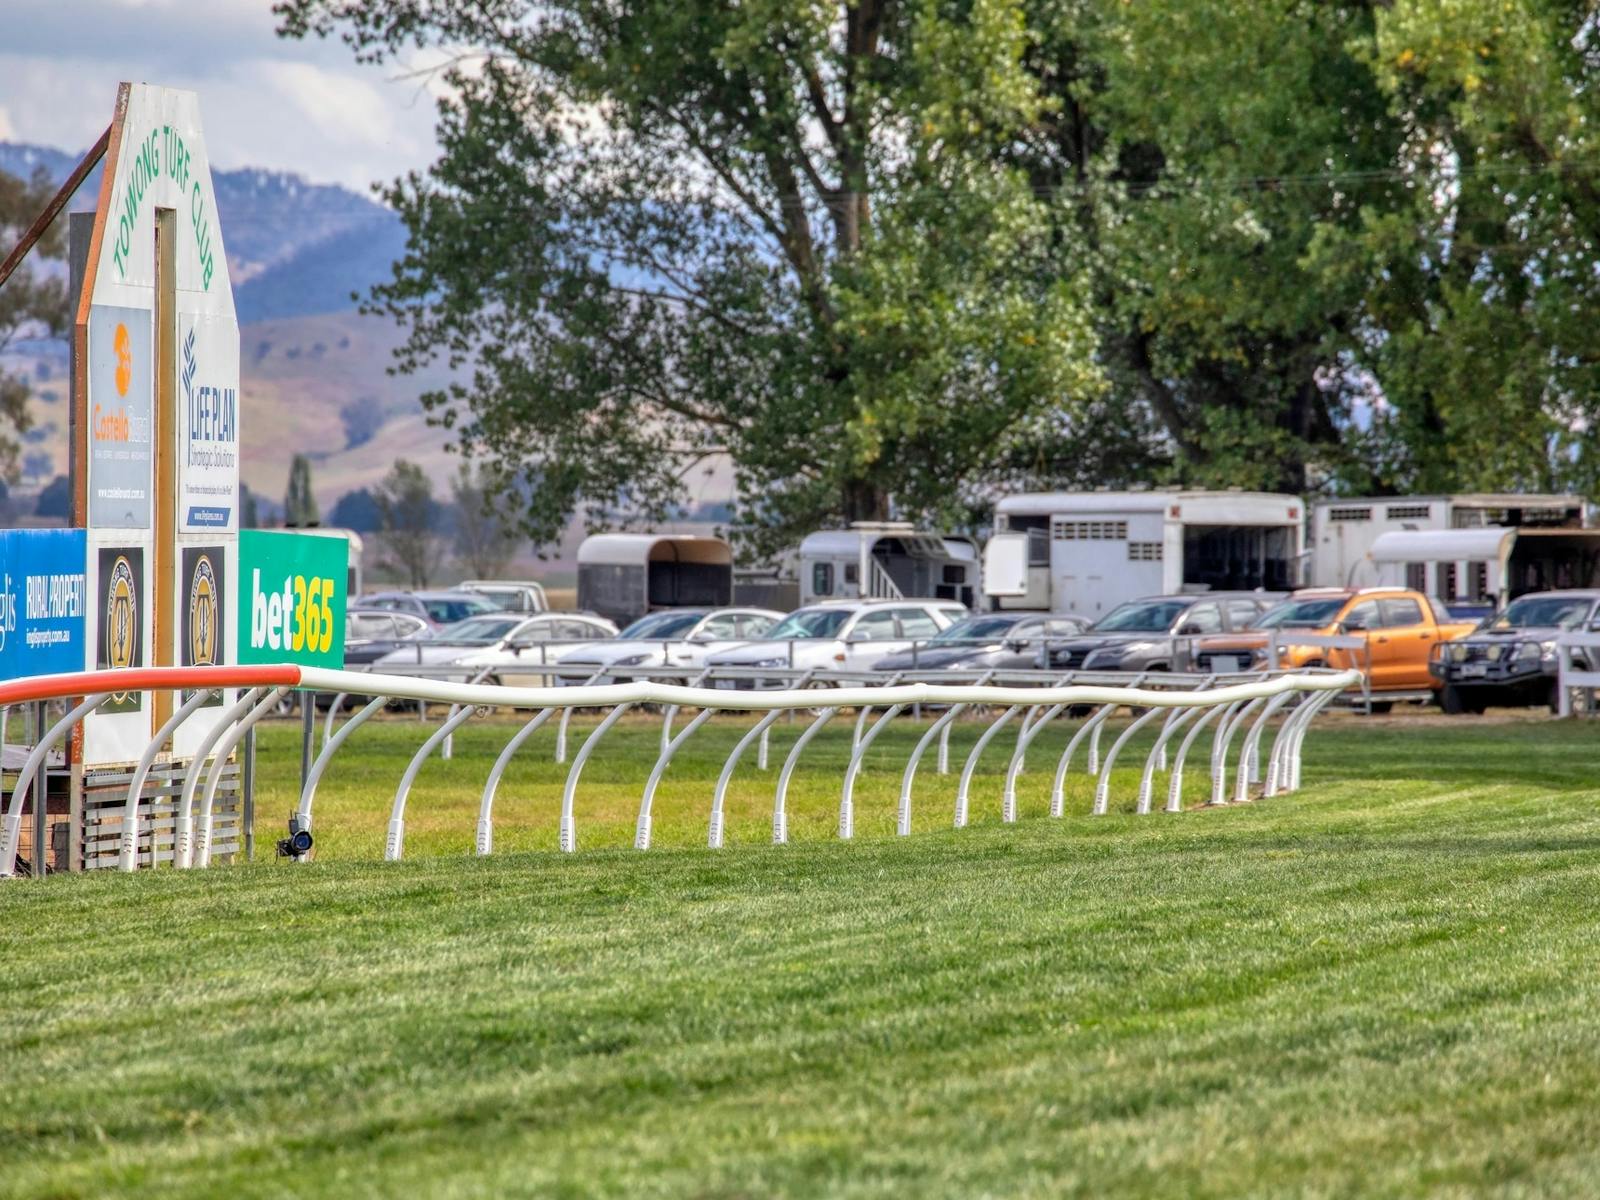 The lush green grass of the Towong Turf Club Racetrack